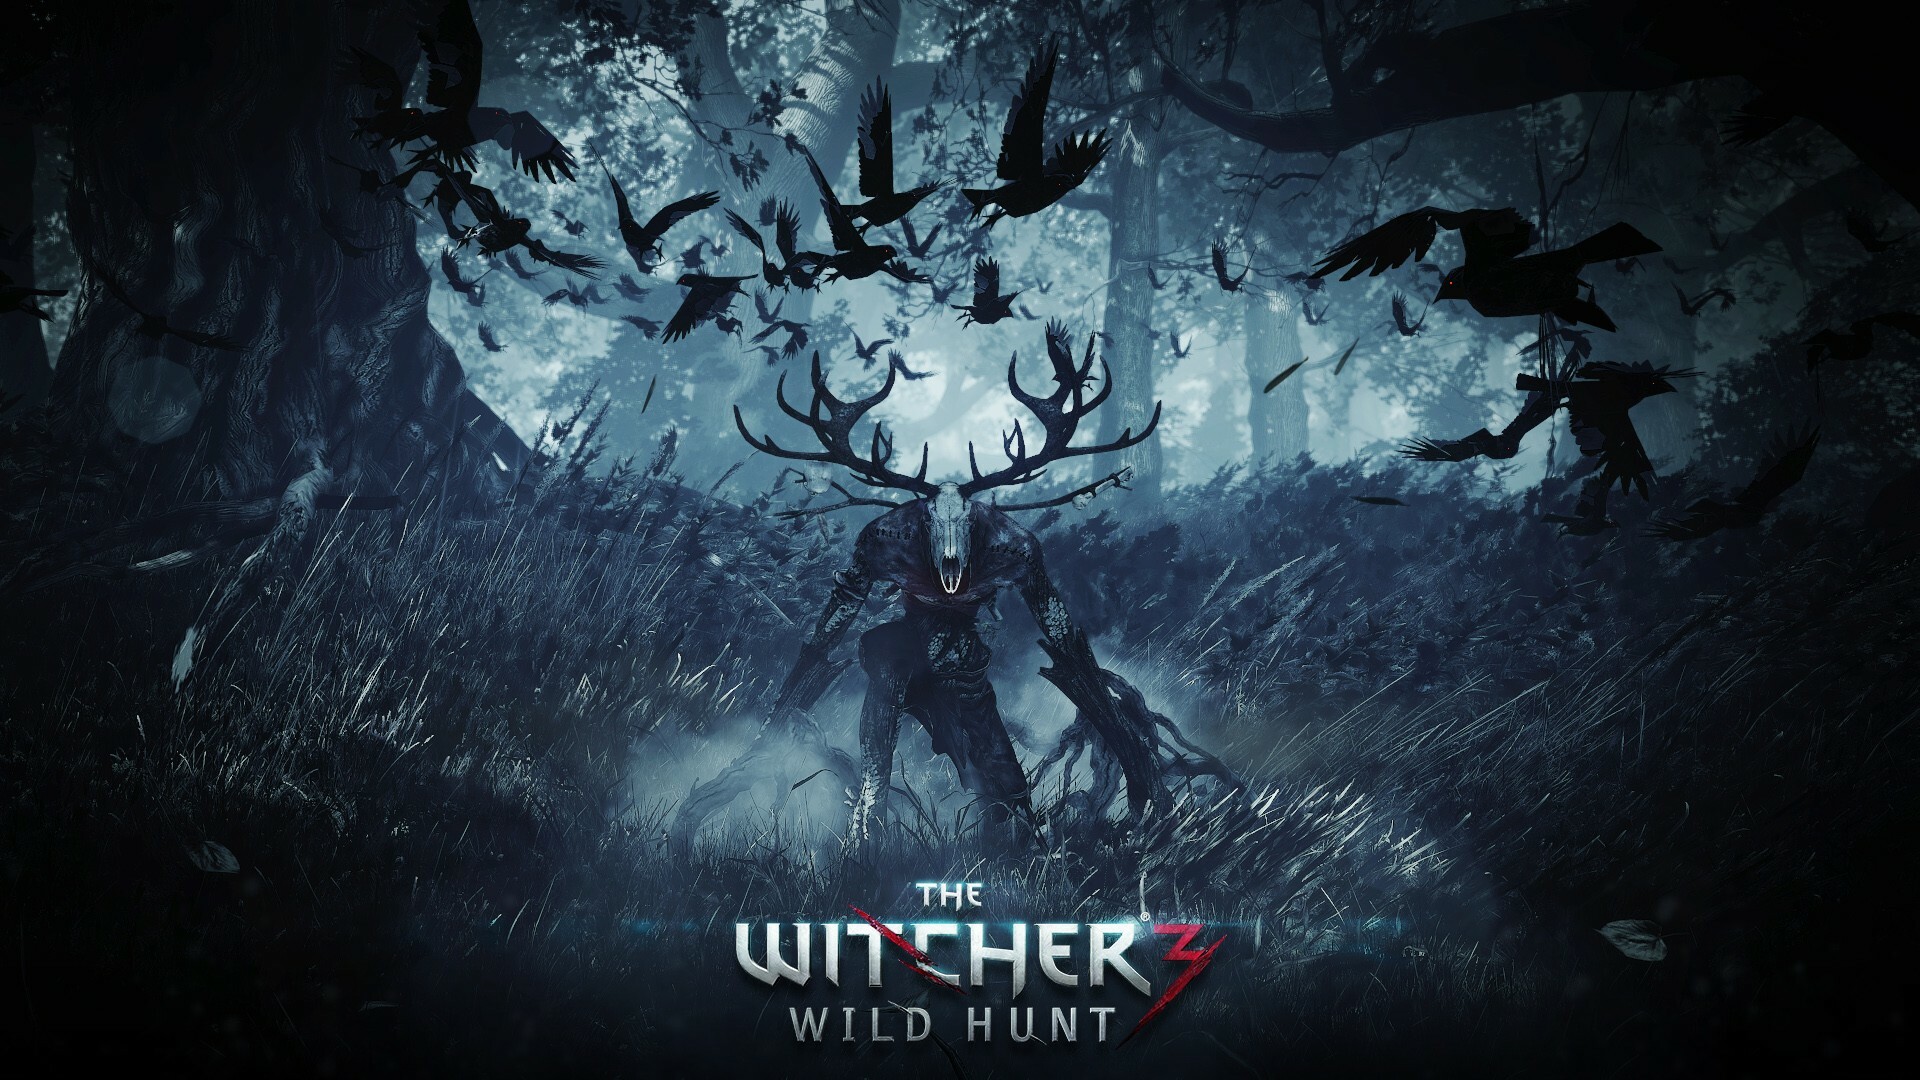 The Witcher (Game): A story-driven, open world adventure set in a dark fantasy universe. 1920x1080 Full HD Background.